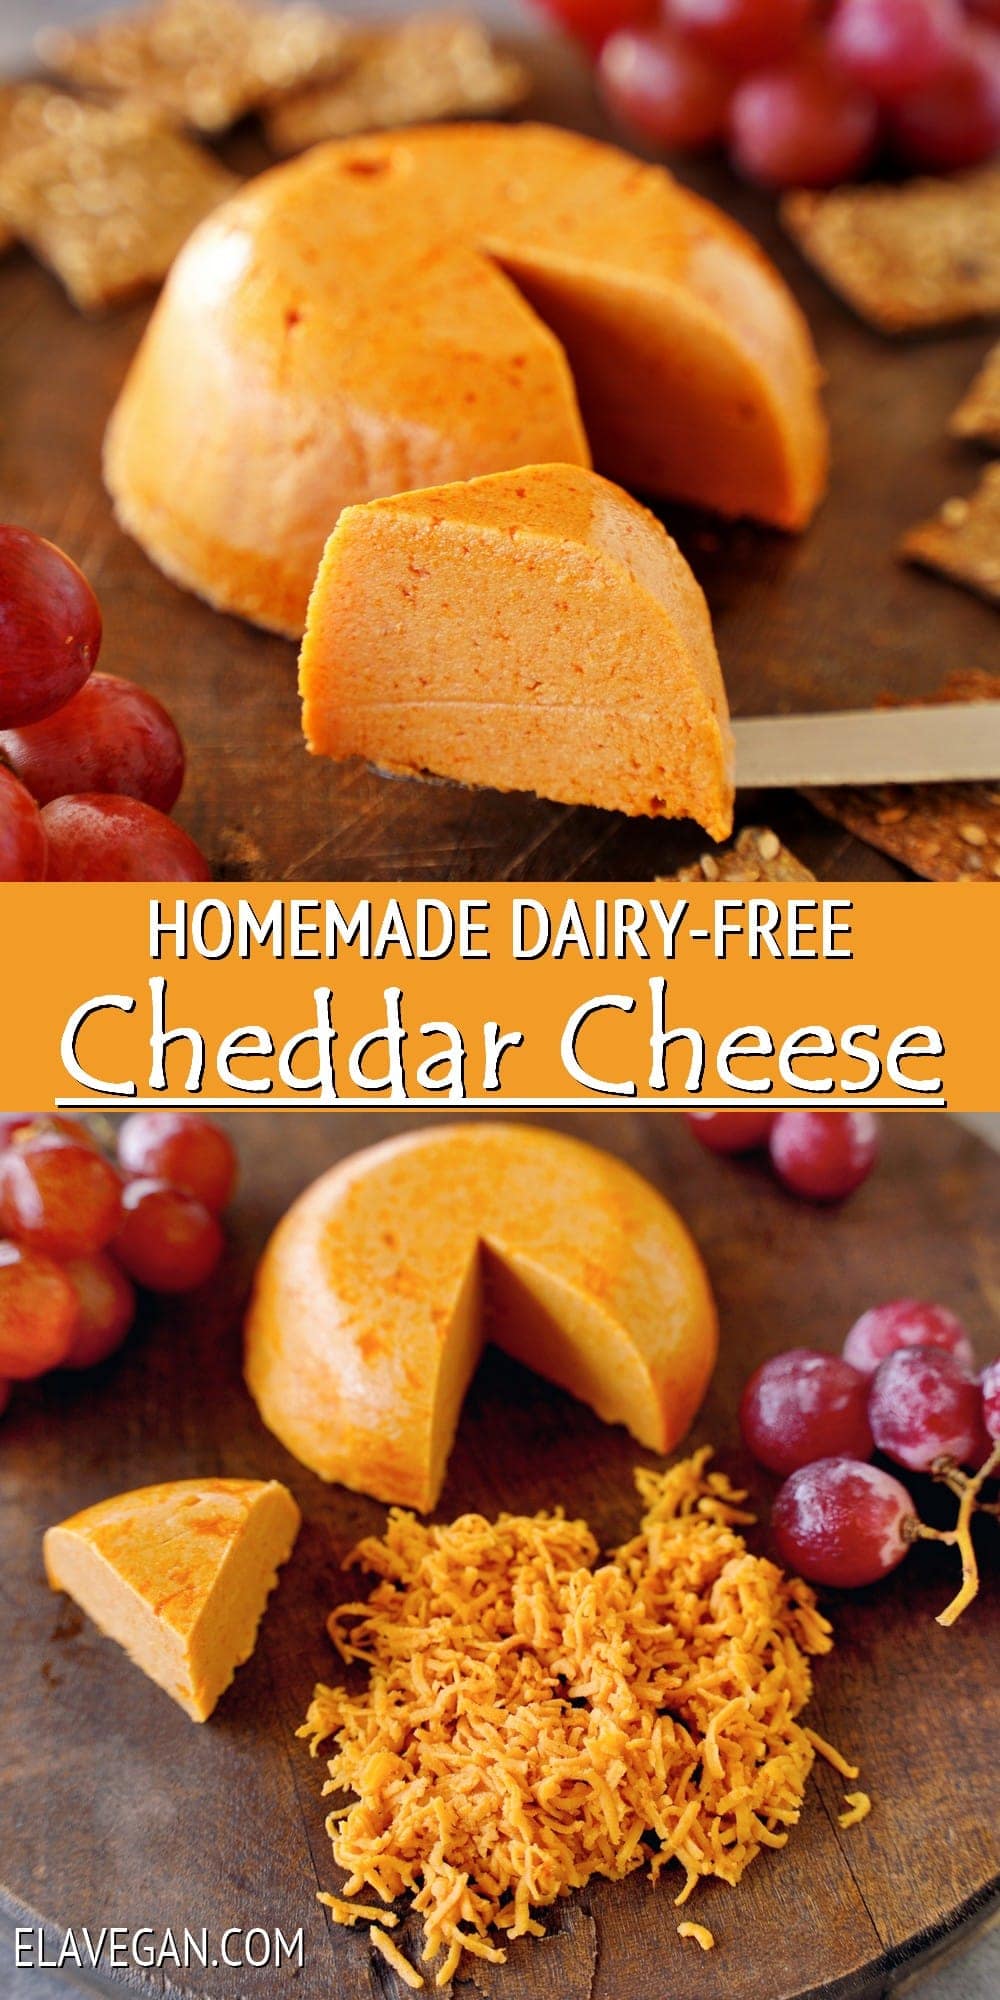 Pinterest collage homemade dairy-free cheddar cheese